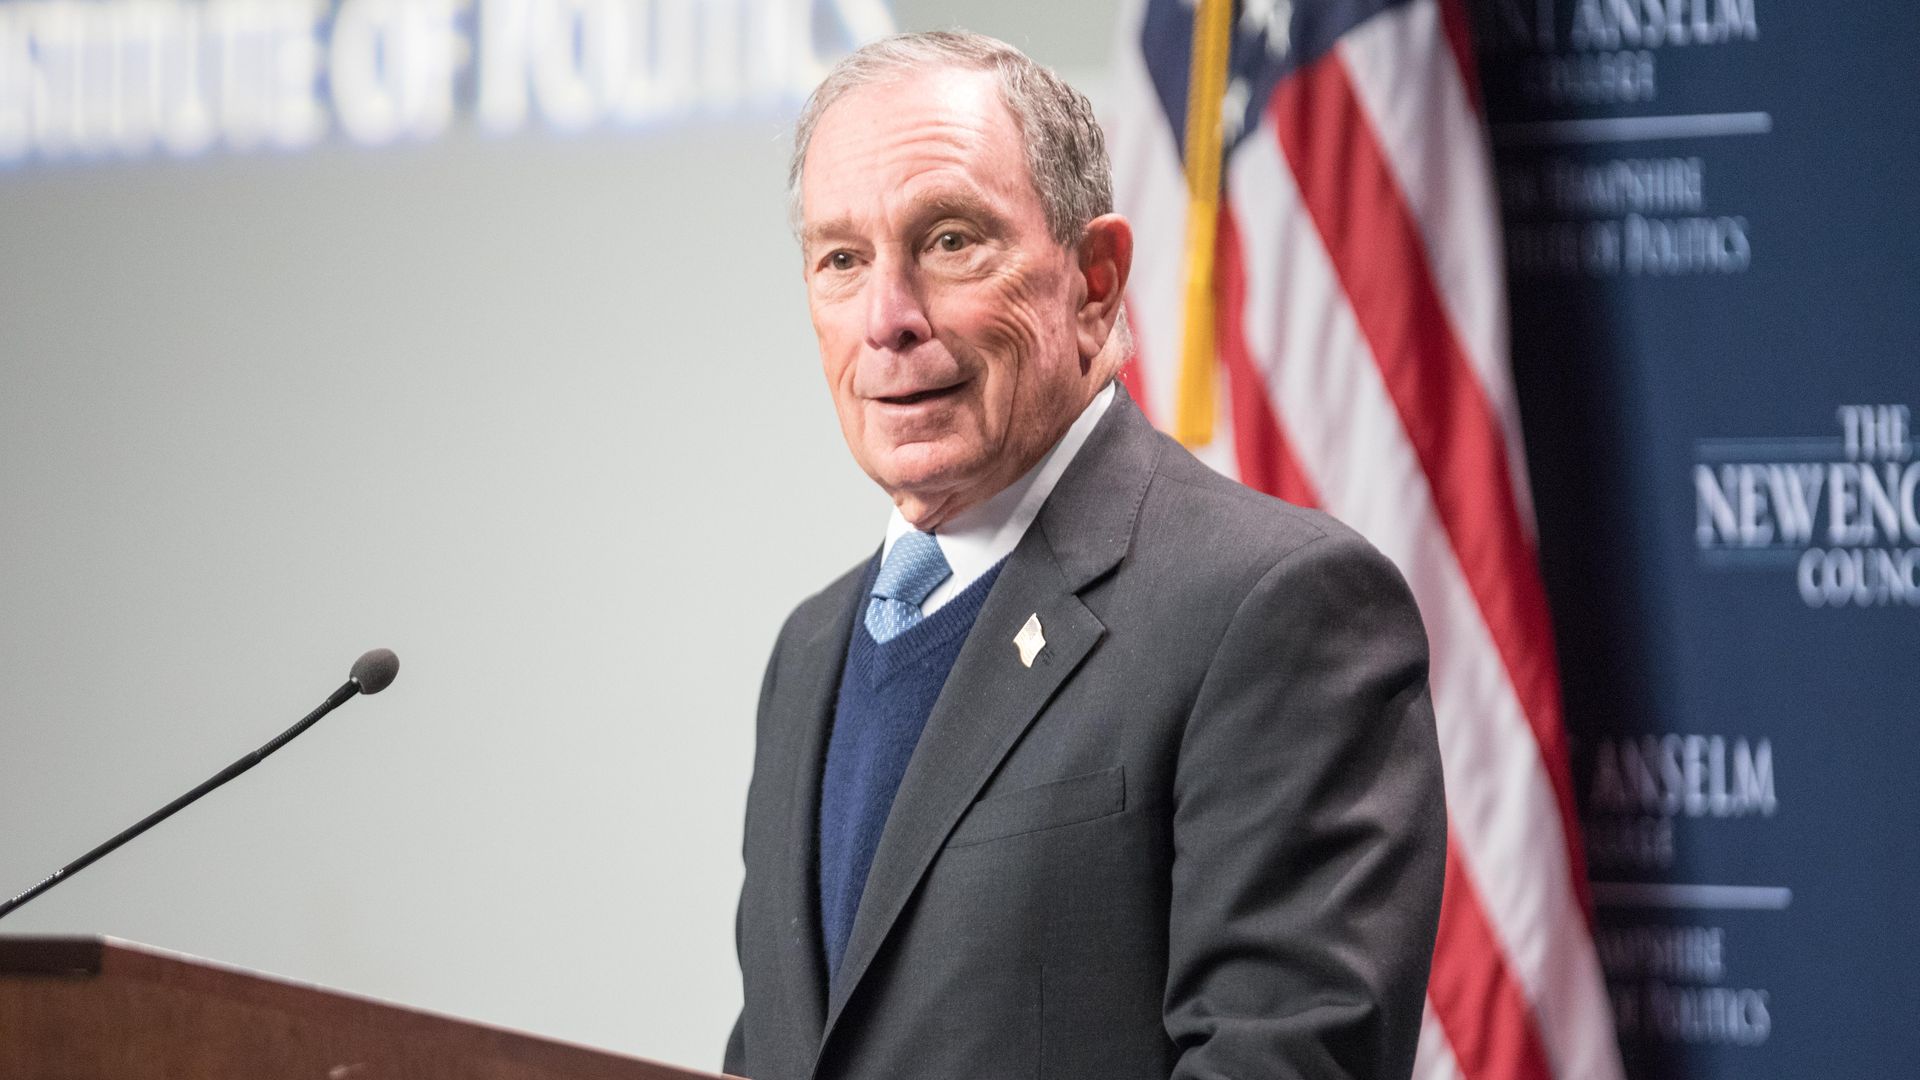 Climate change activists aren't loving Mike Bloomberg's 2020 flirtations - Axios